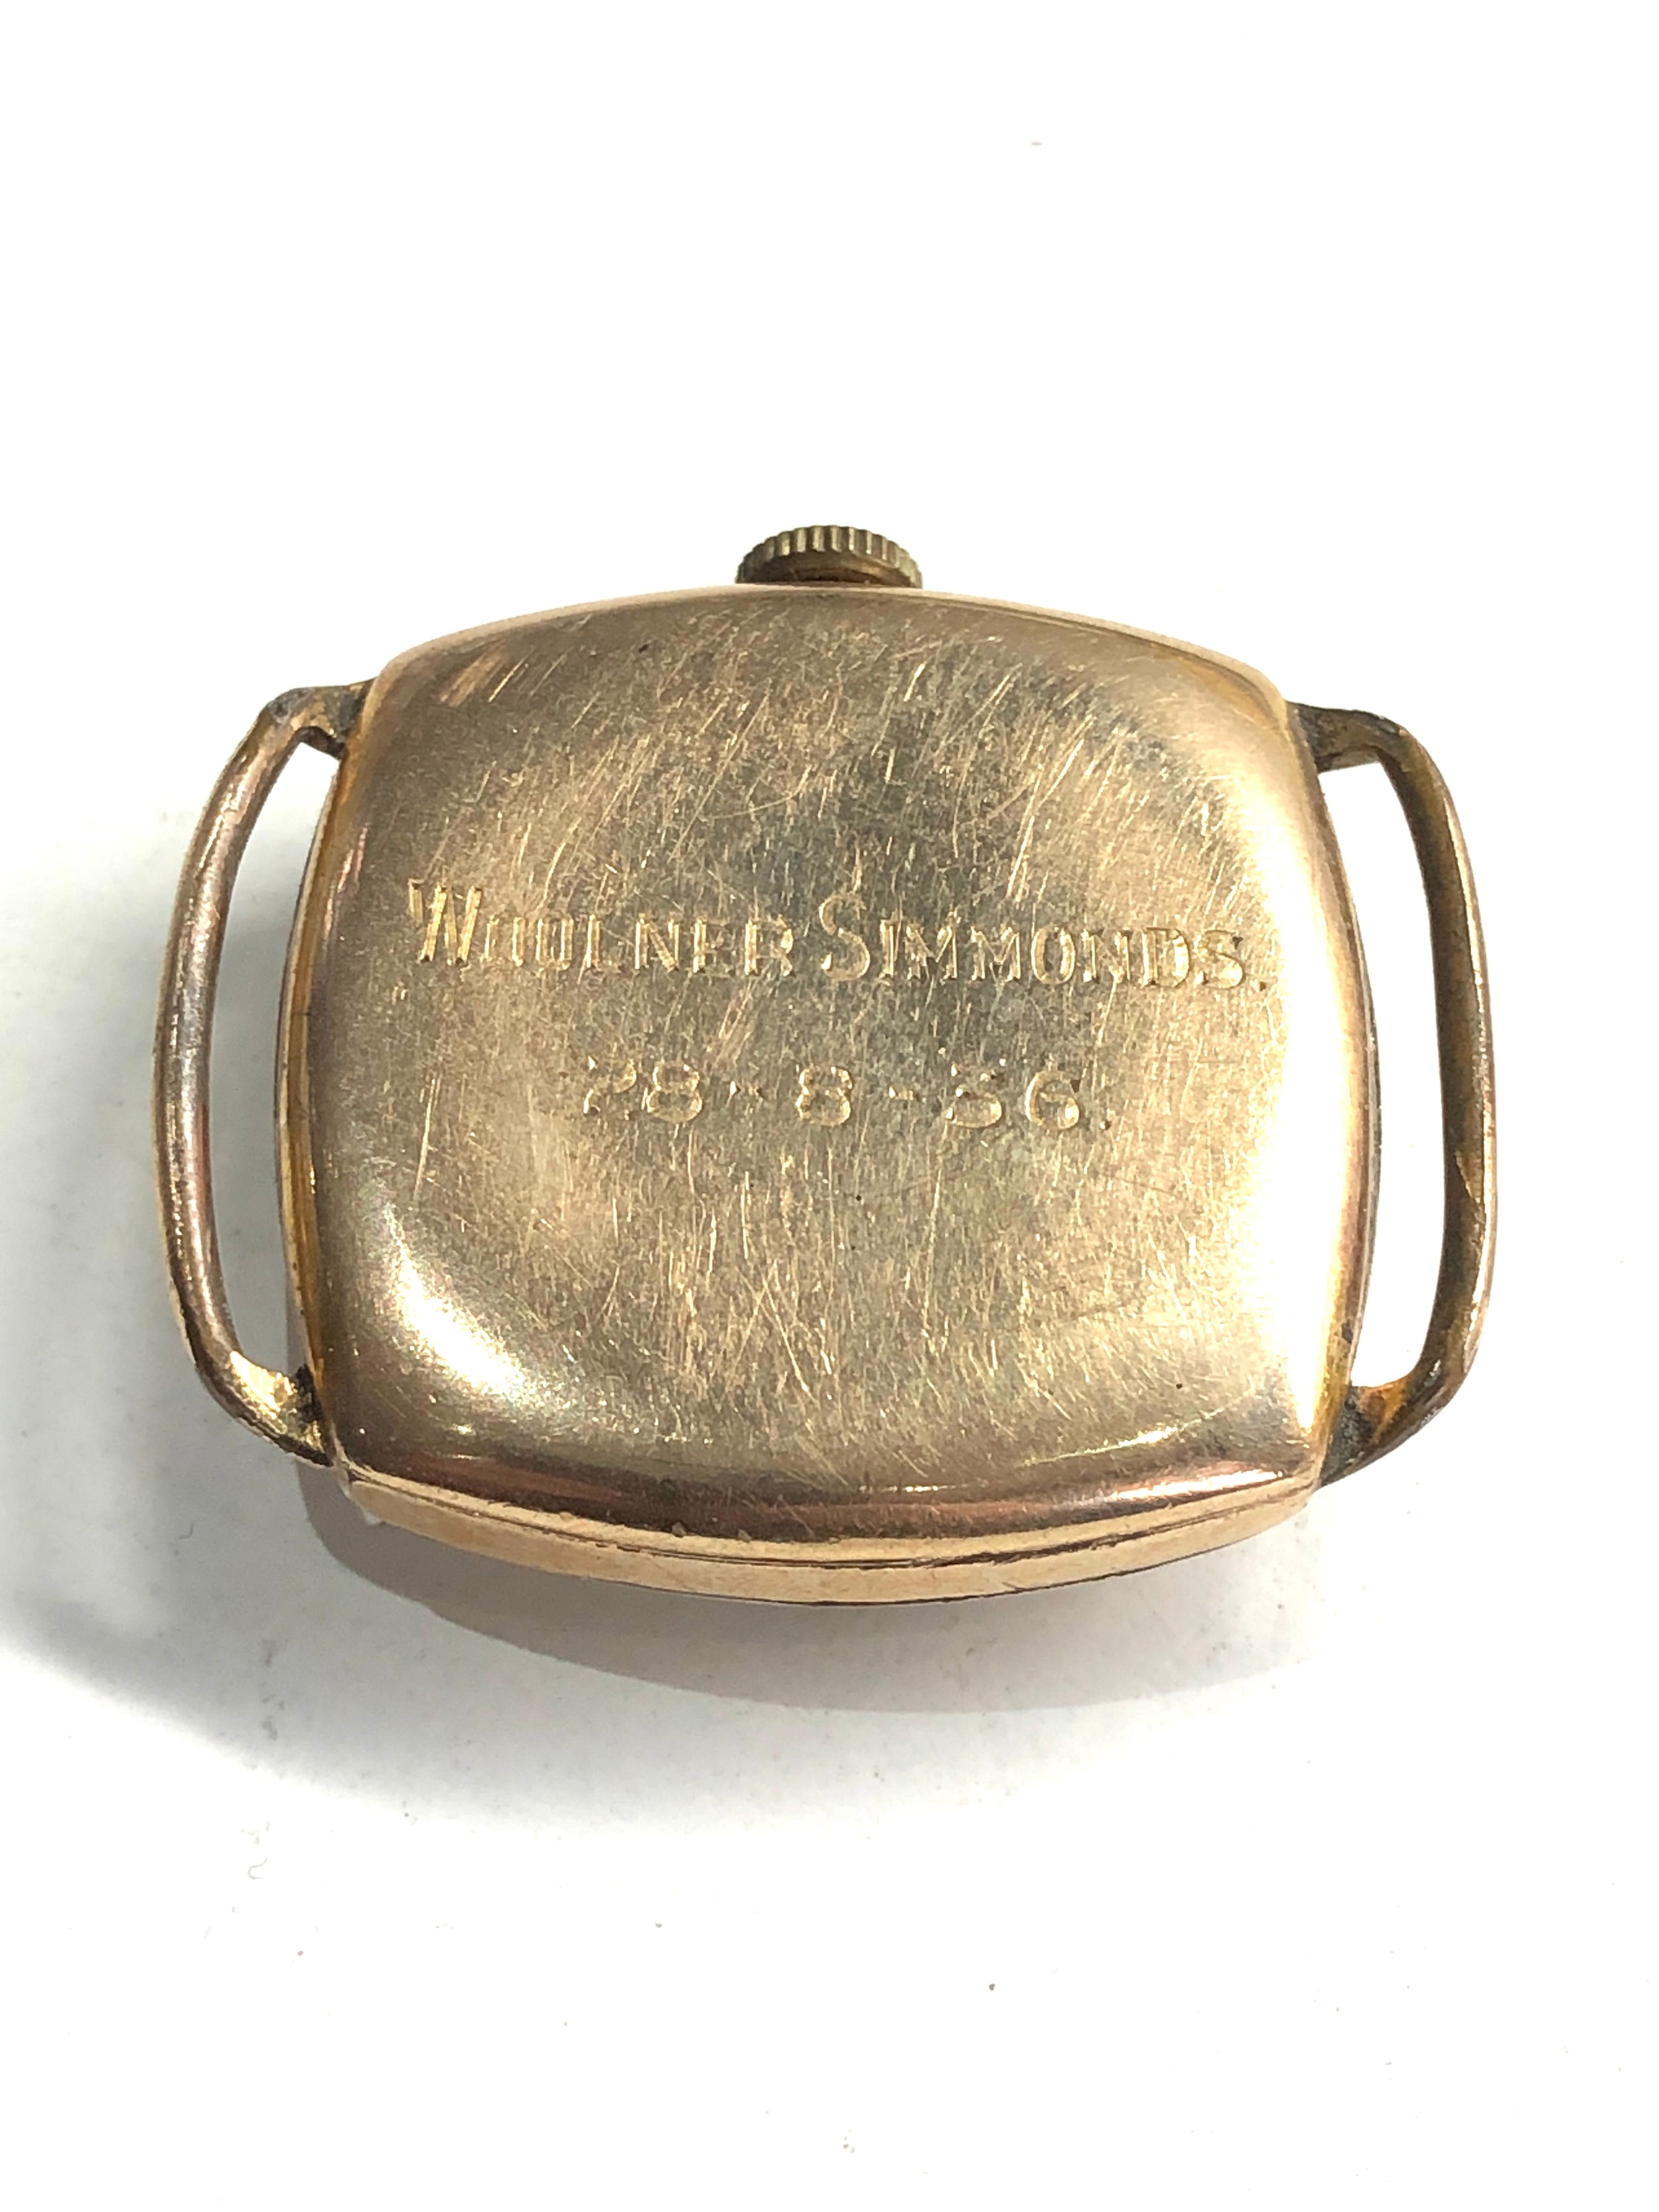 1930s Omega gold plated gents wristwatch the watch is ticking but no warranty given engraved on back - Image 3 of 6